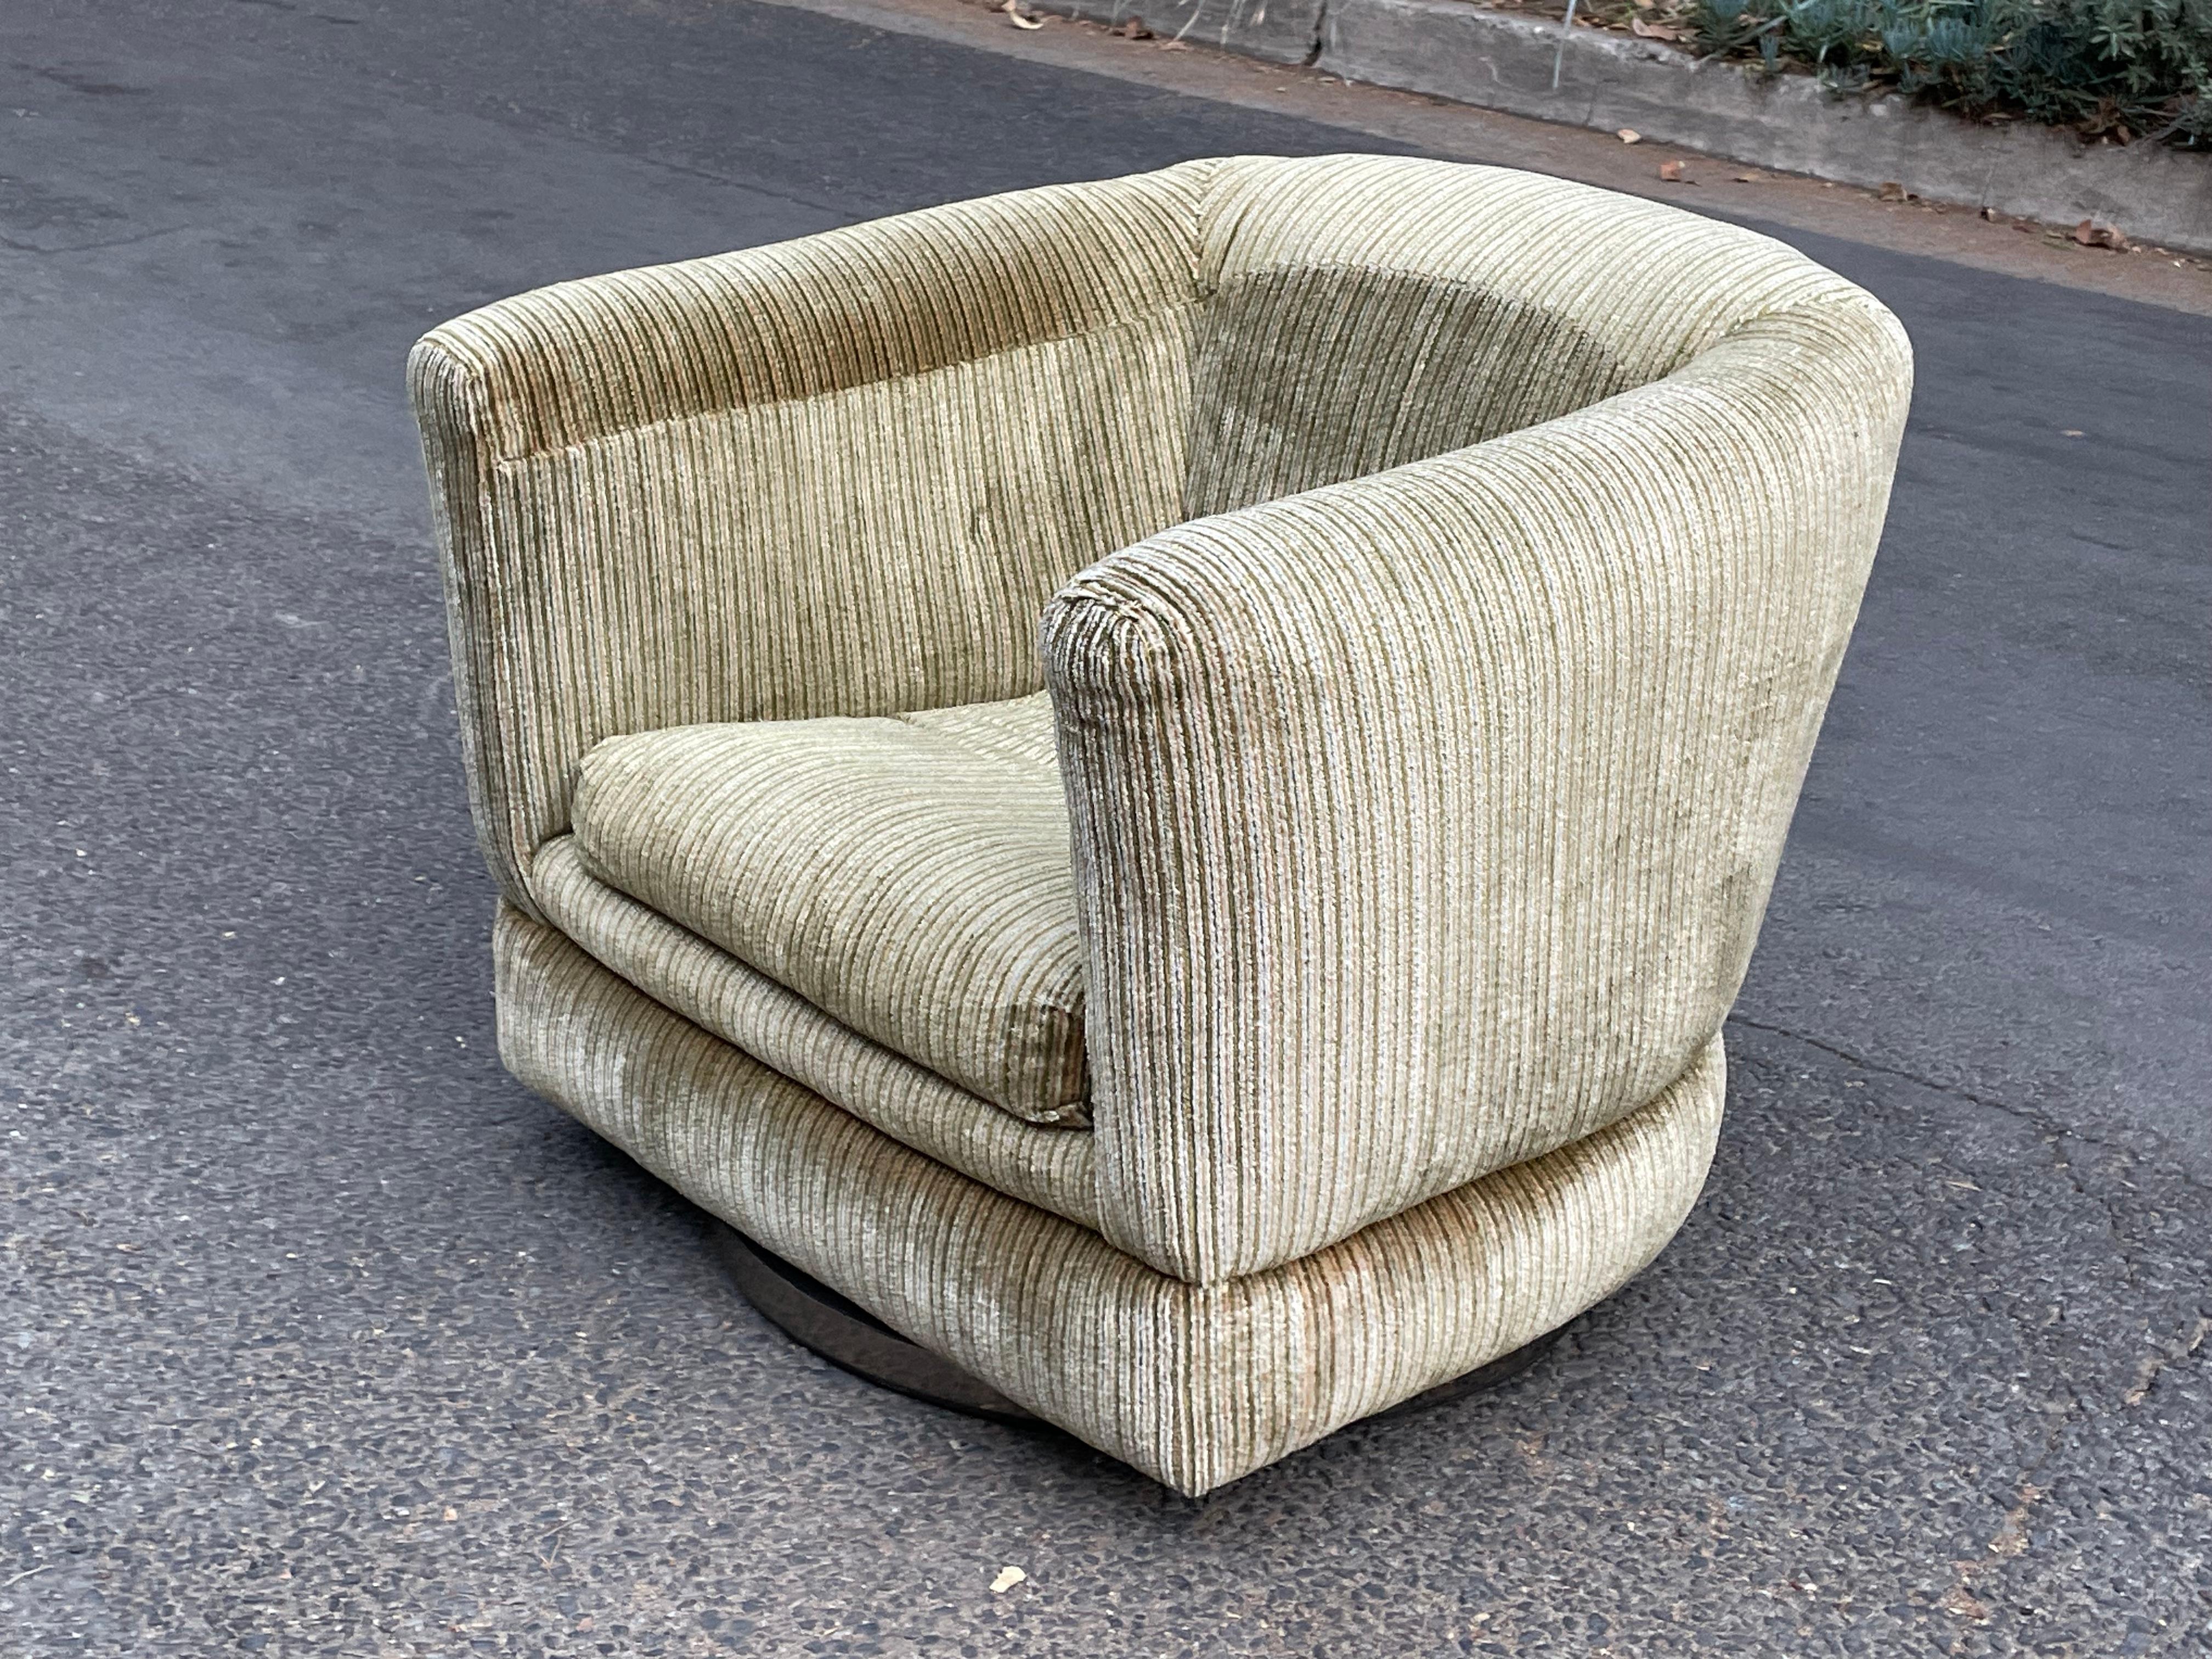 Magnificent mid-century Milo Baughman swivel lounge chair with chrome base. Stunning fabric. USA, 1970s.

Great lines on this chair.

Exceptional original condition. The fabric is in pristine condition. There are minor areas of wear on chrome swivel